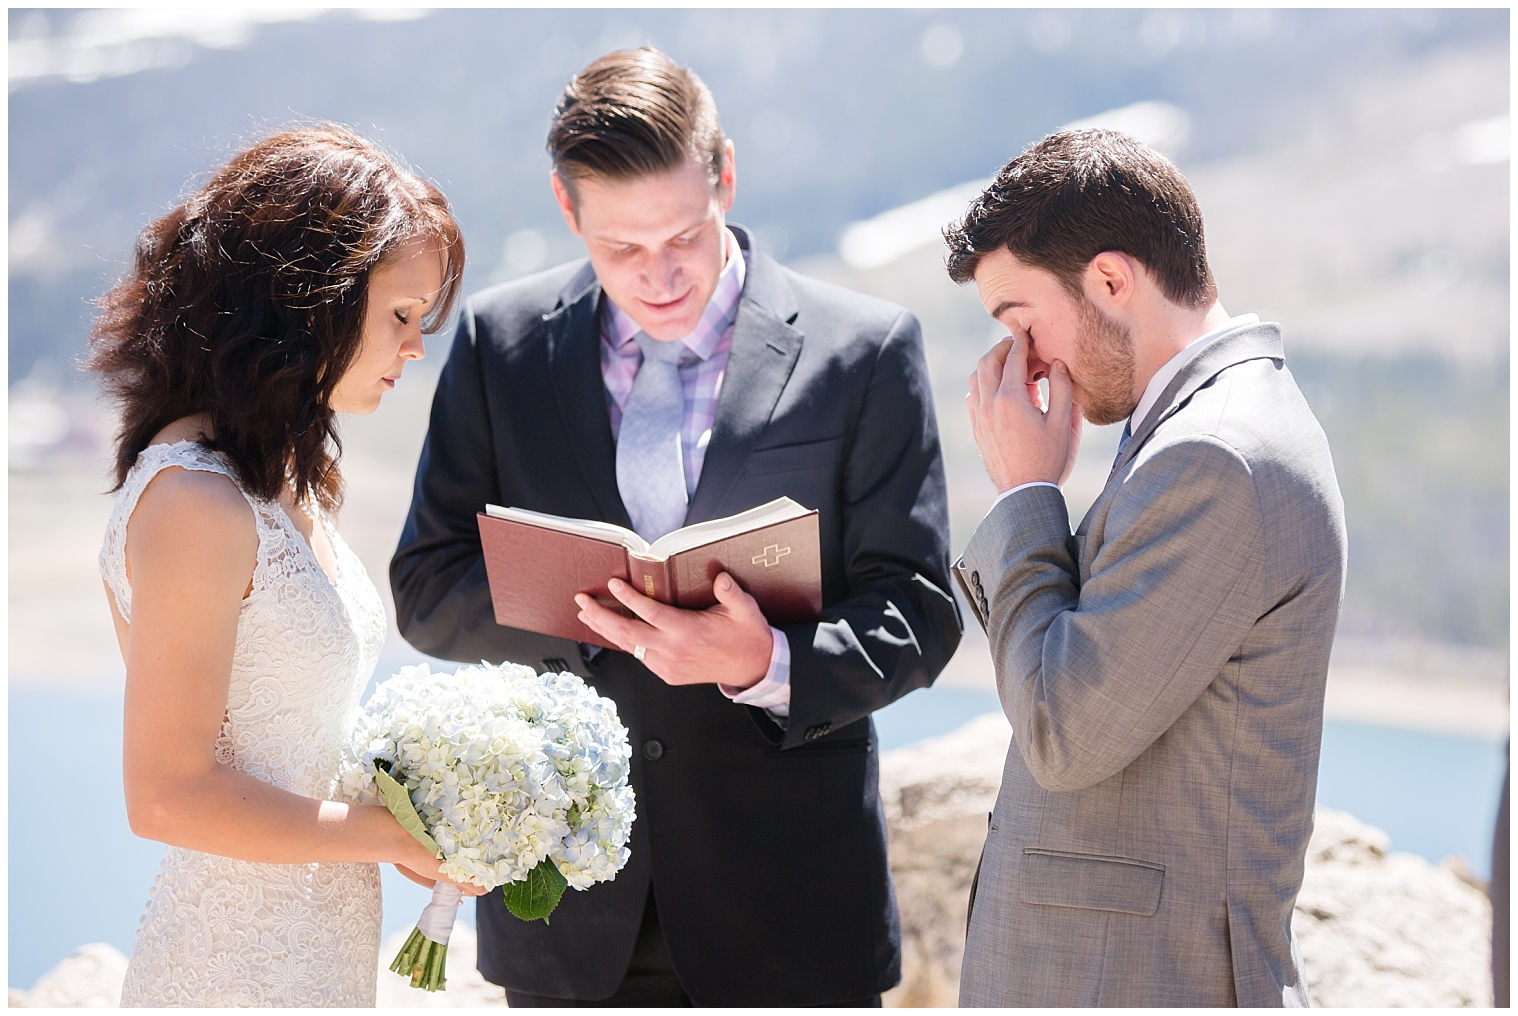 Groom cries during the ceremony at his Breckenridge mountain elopement.